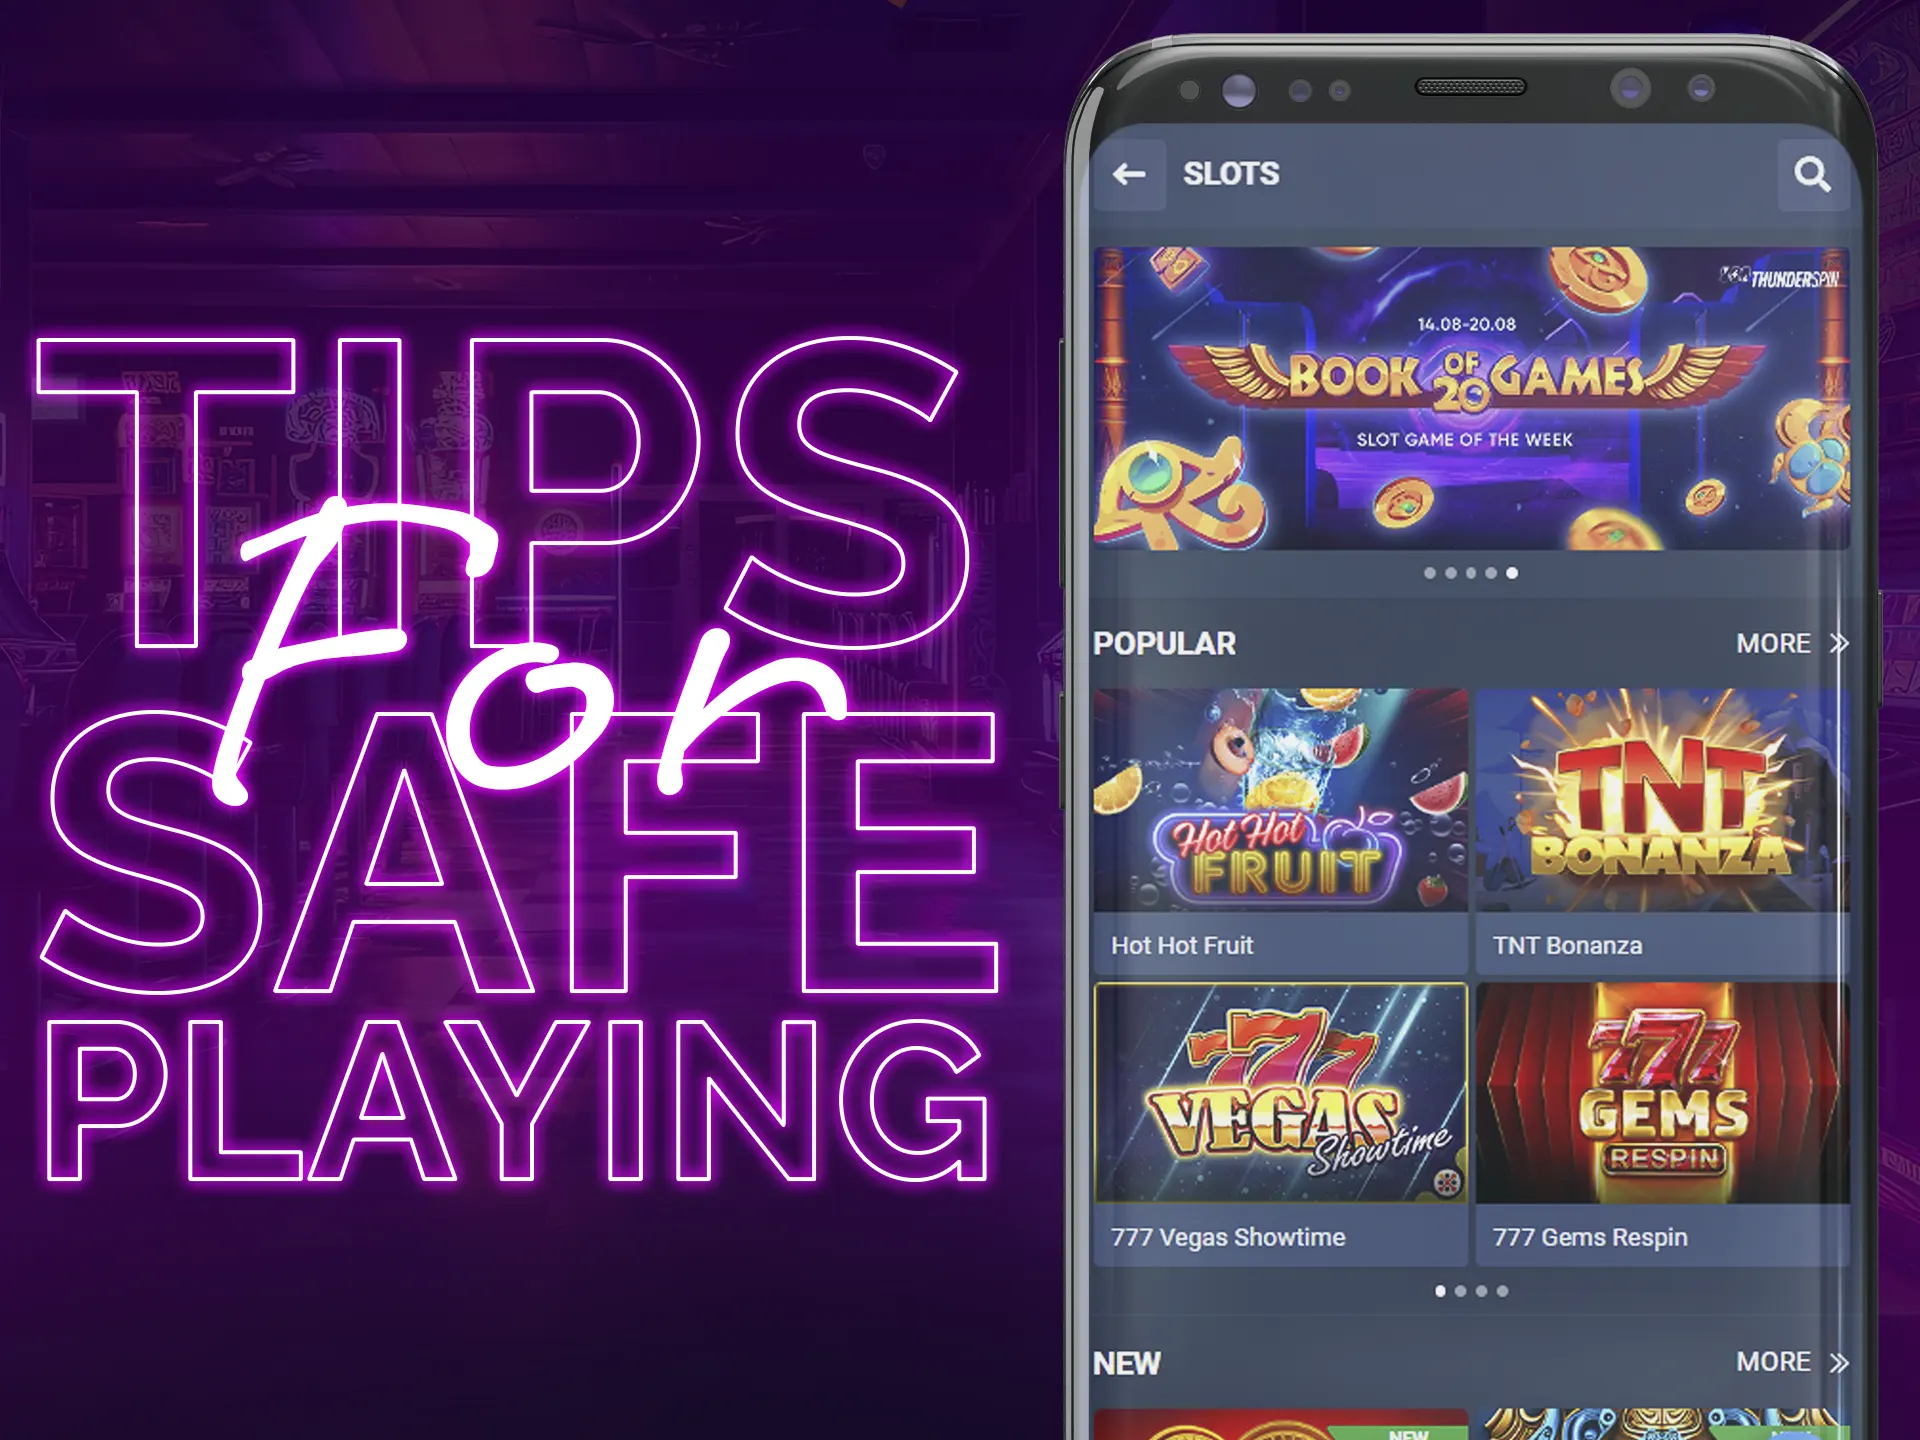 Stick to these tips to safely play slots through apps.